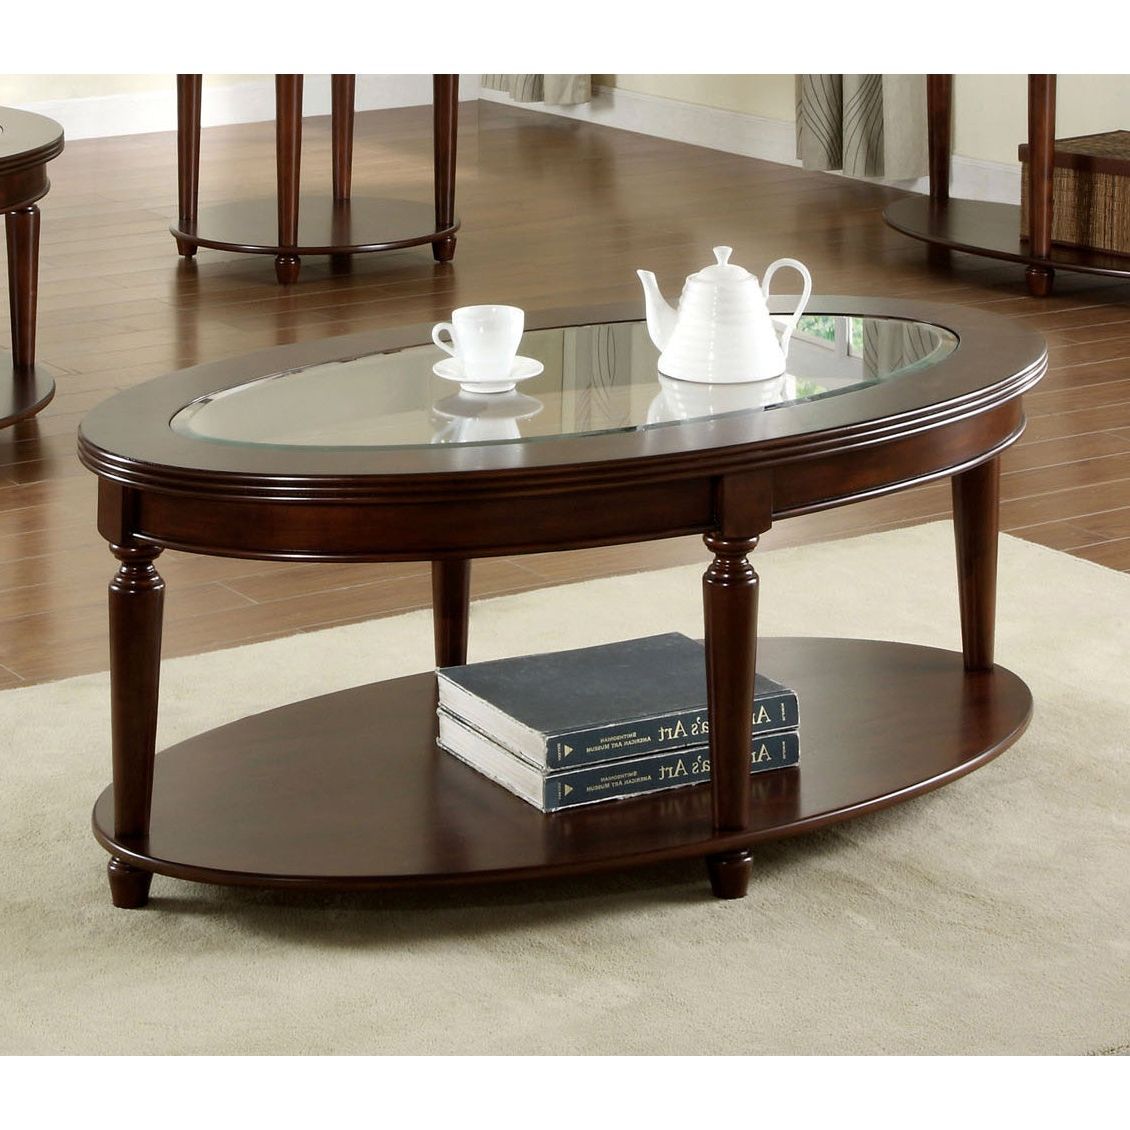 Furniture Of America Crescent Dark Cherry Glass Top Oval Coffee Table In Favorite Furniture Of America Crescent Dark Cherry Glass Top Oval Coffee Tables (View 1 of 20)